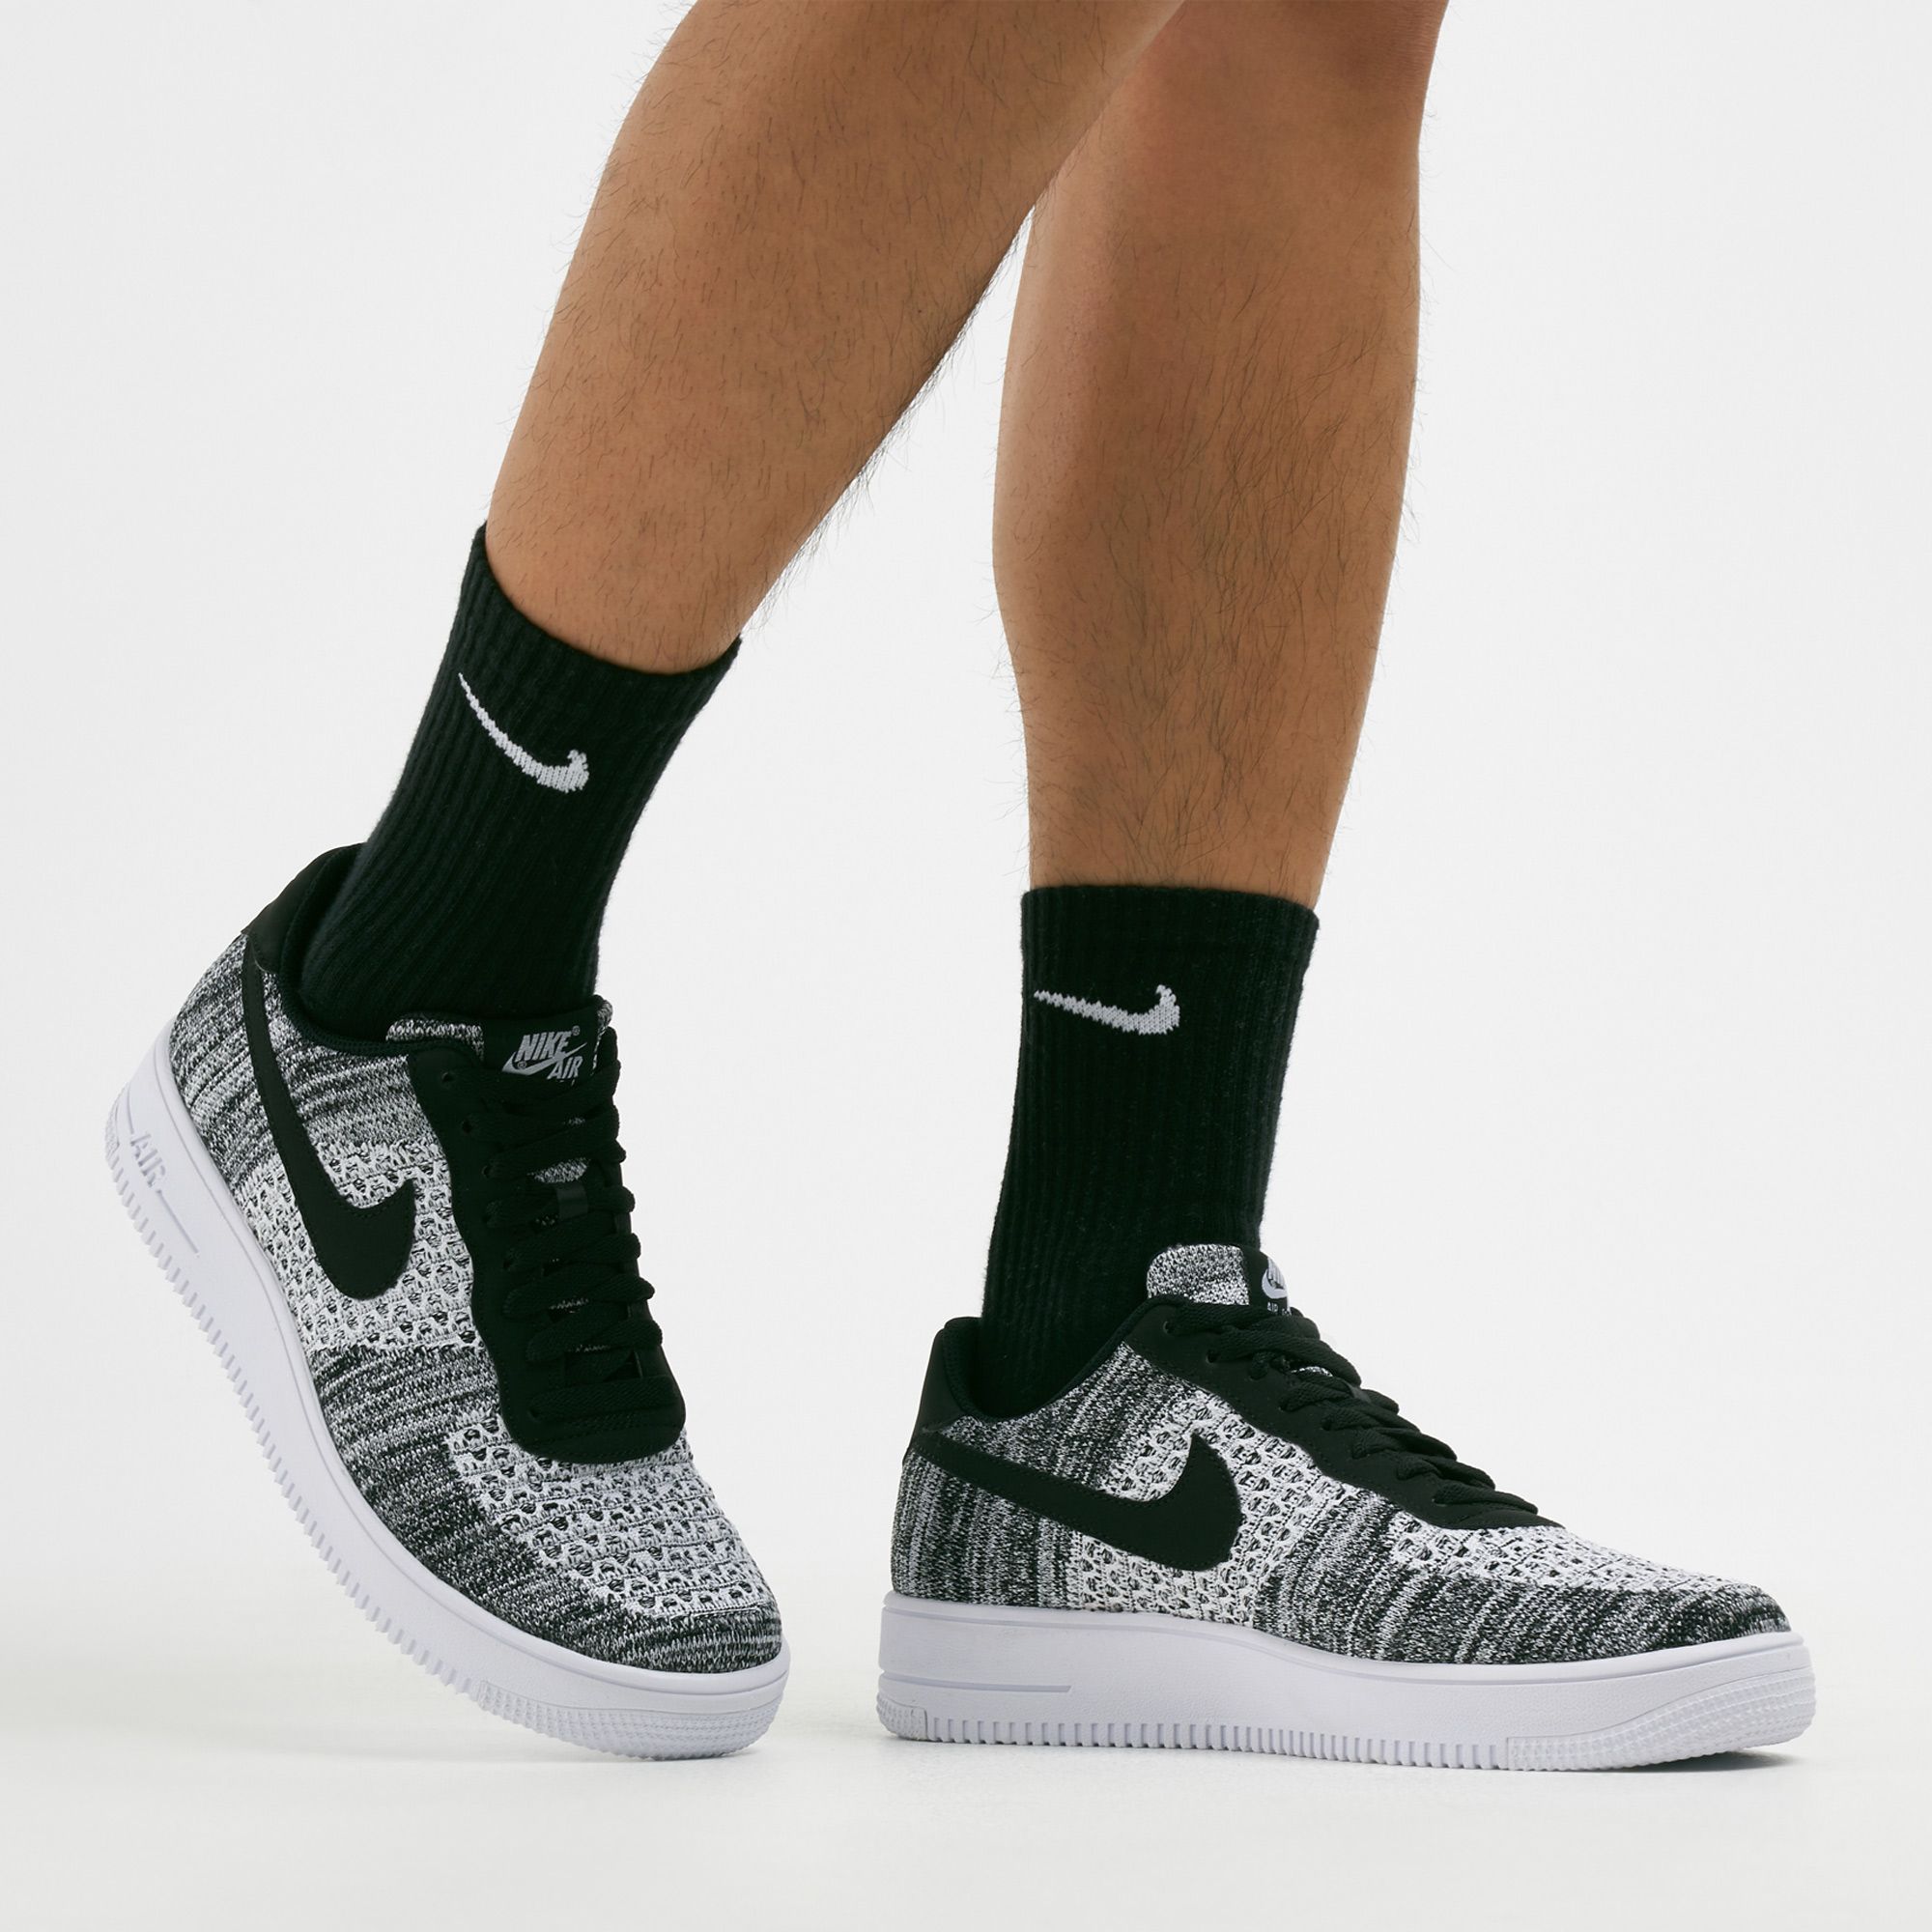 flyknit 2.0 air force 1